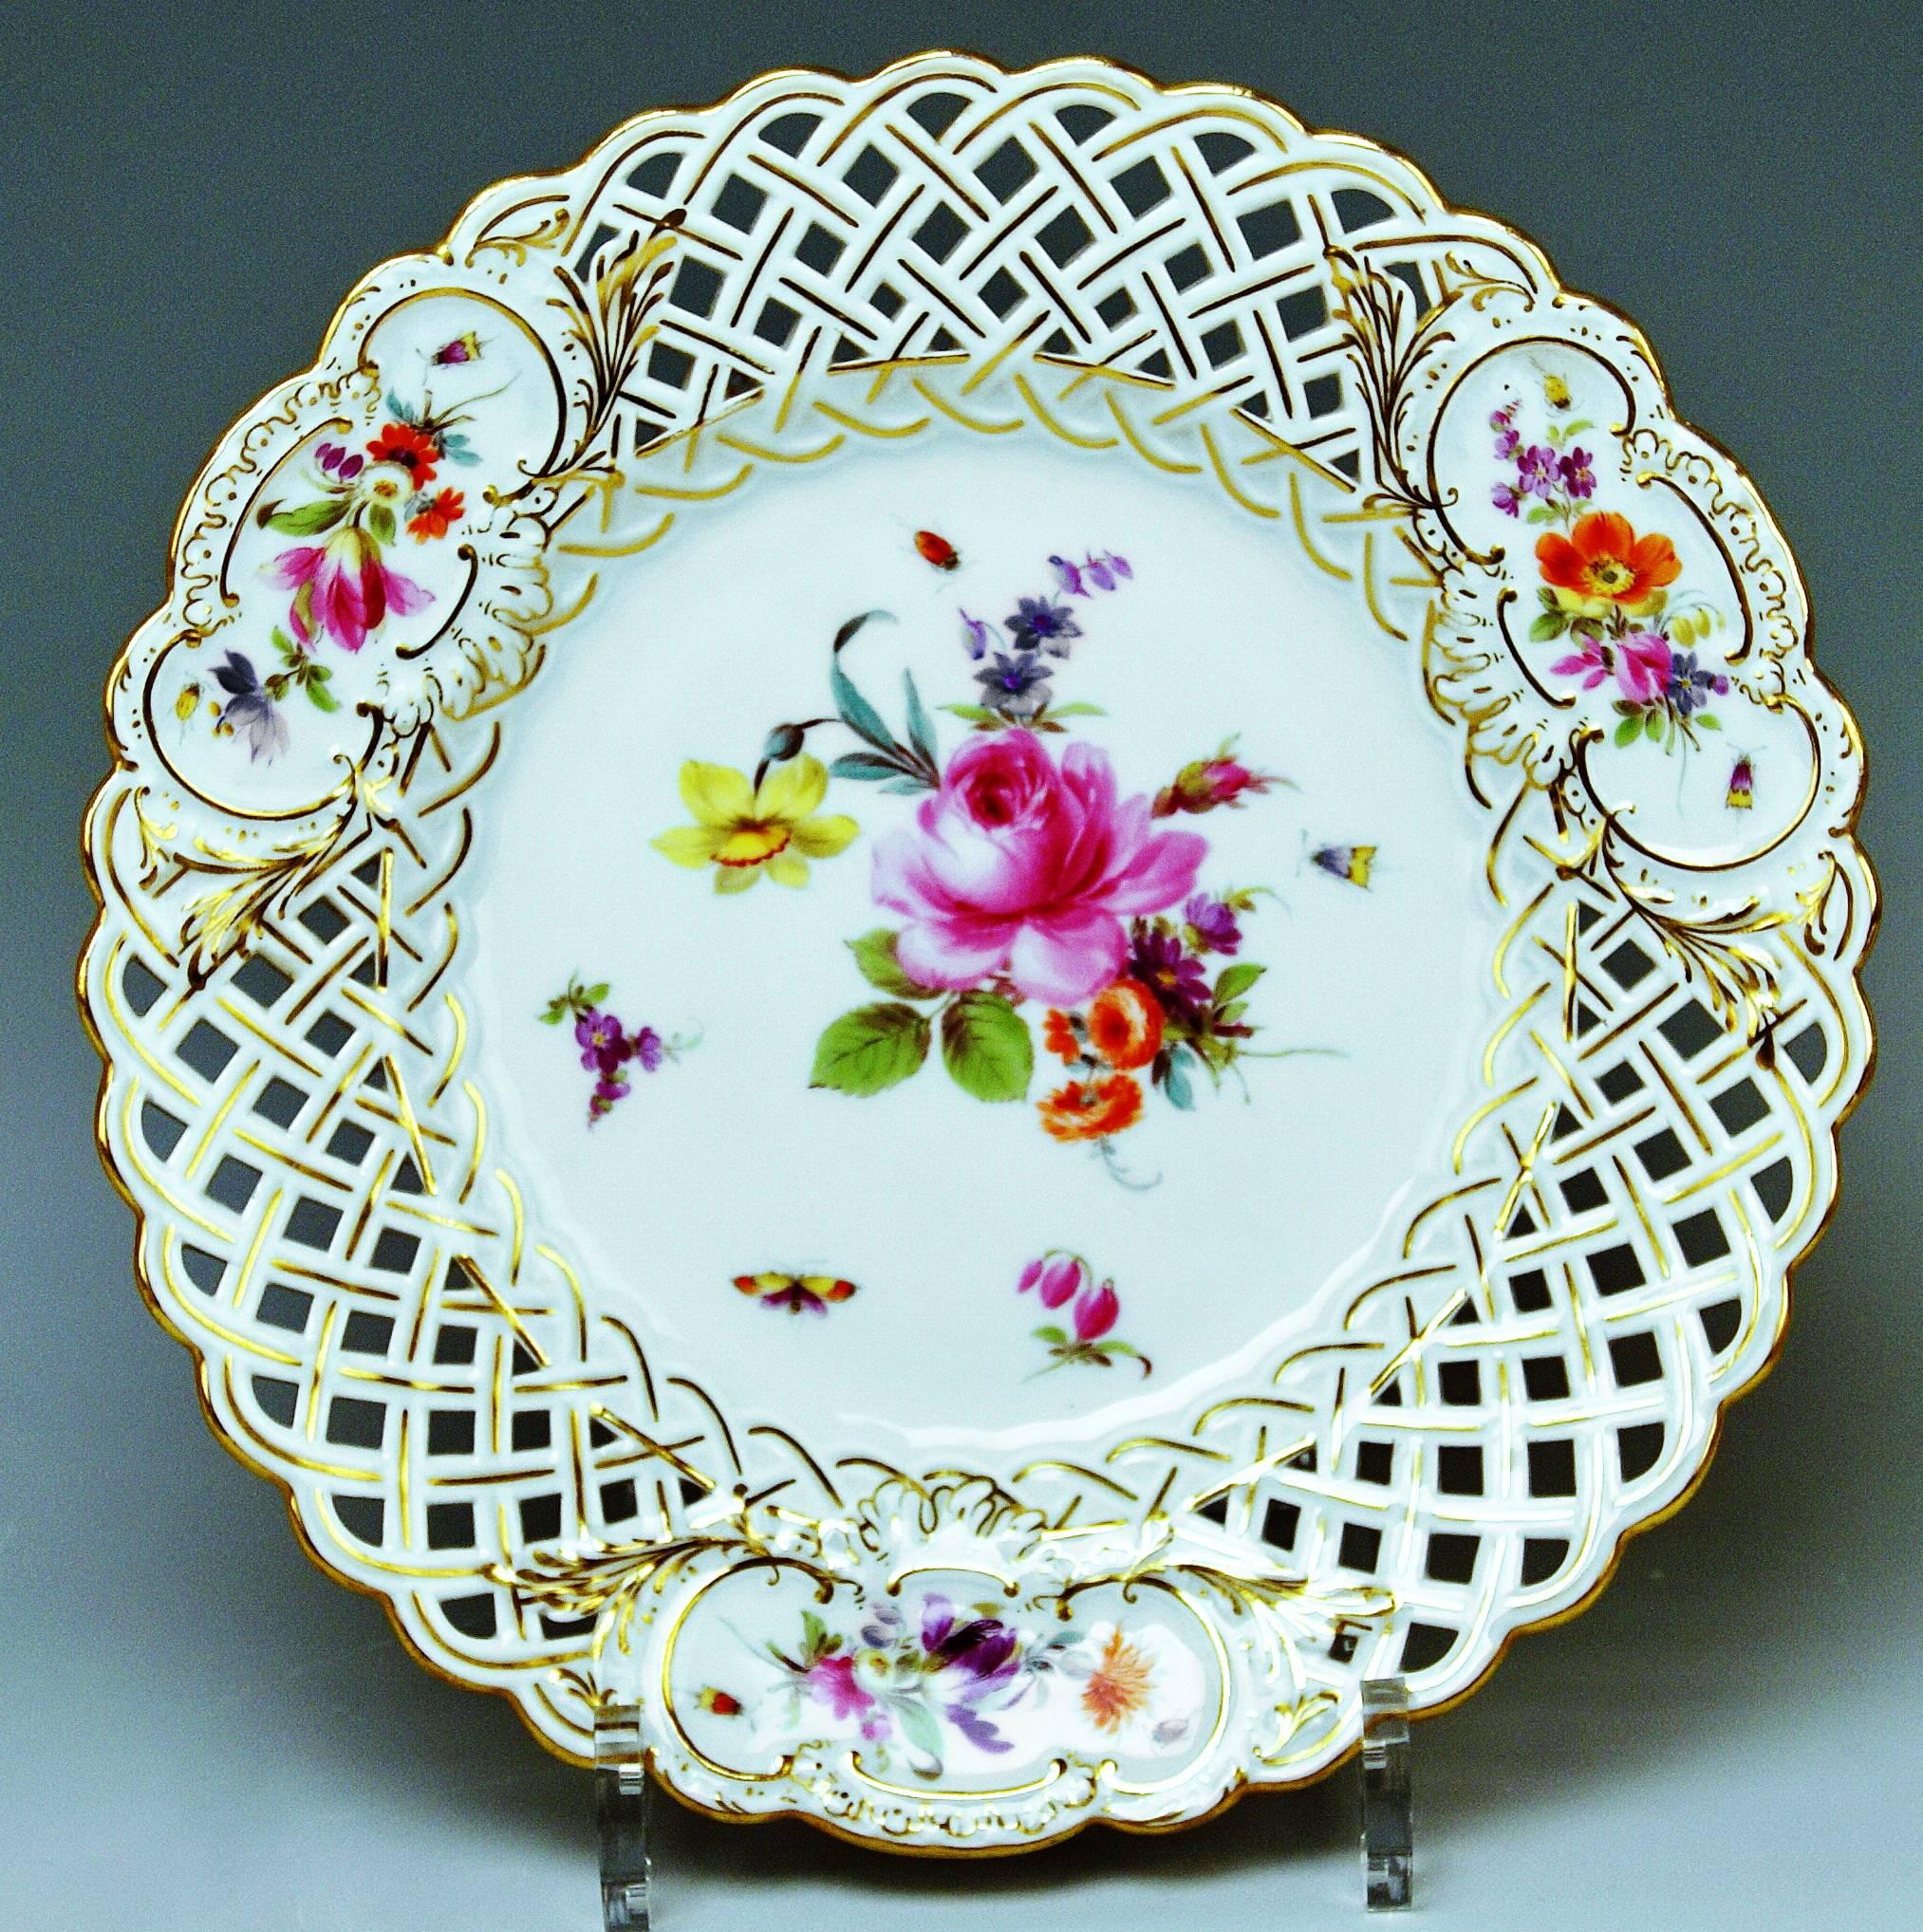 19th Century Meissen Plates Vintage Reticulated Edge Multicolored Flower Paintings circa 1870